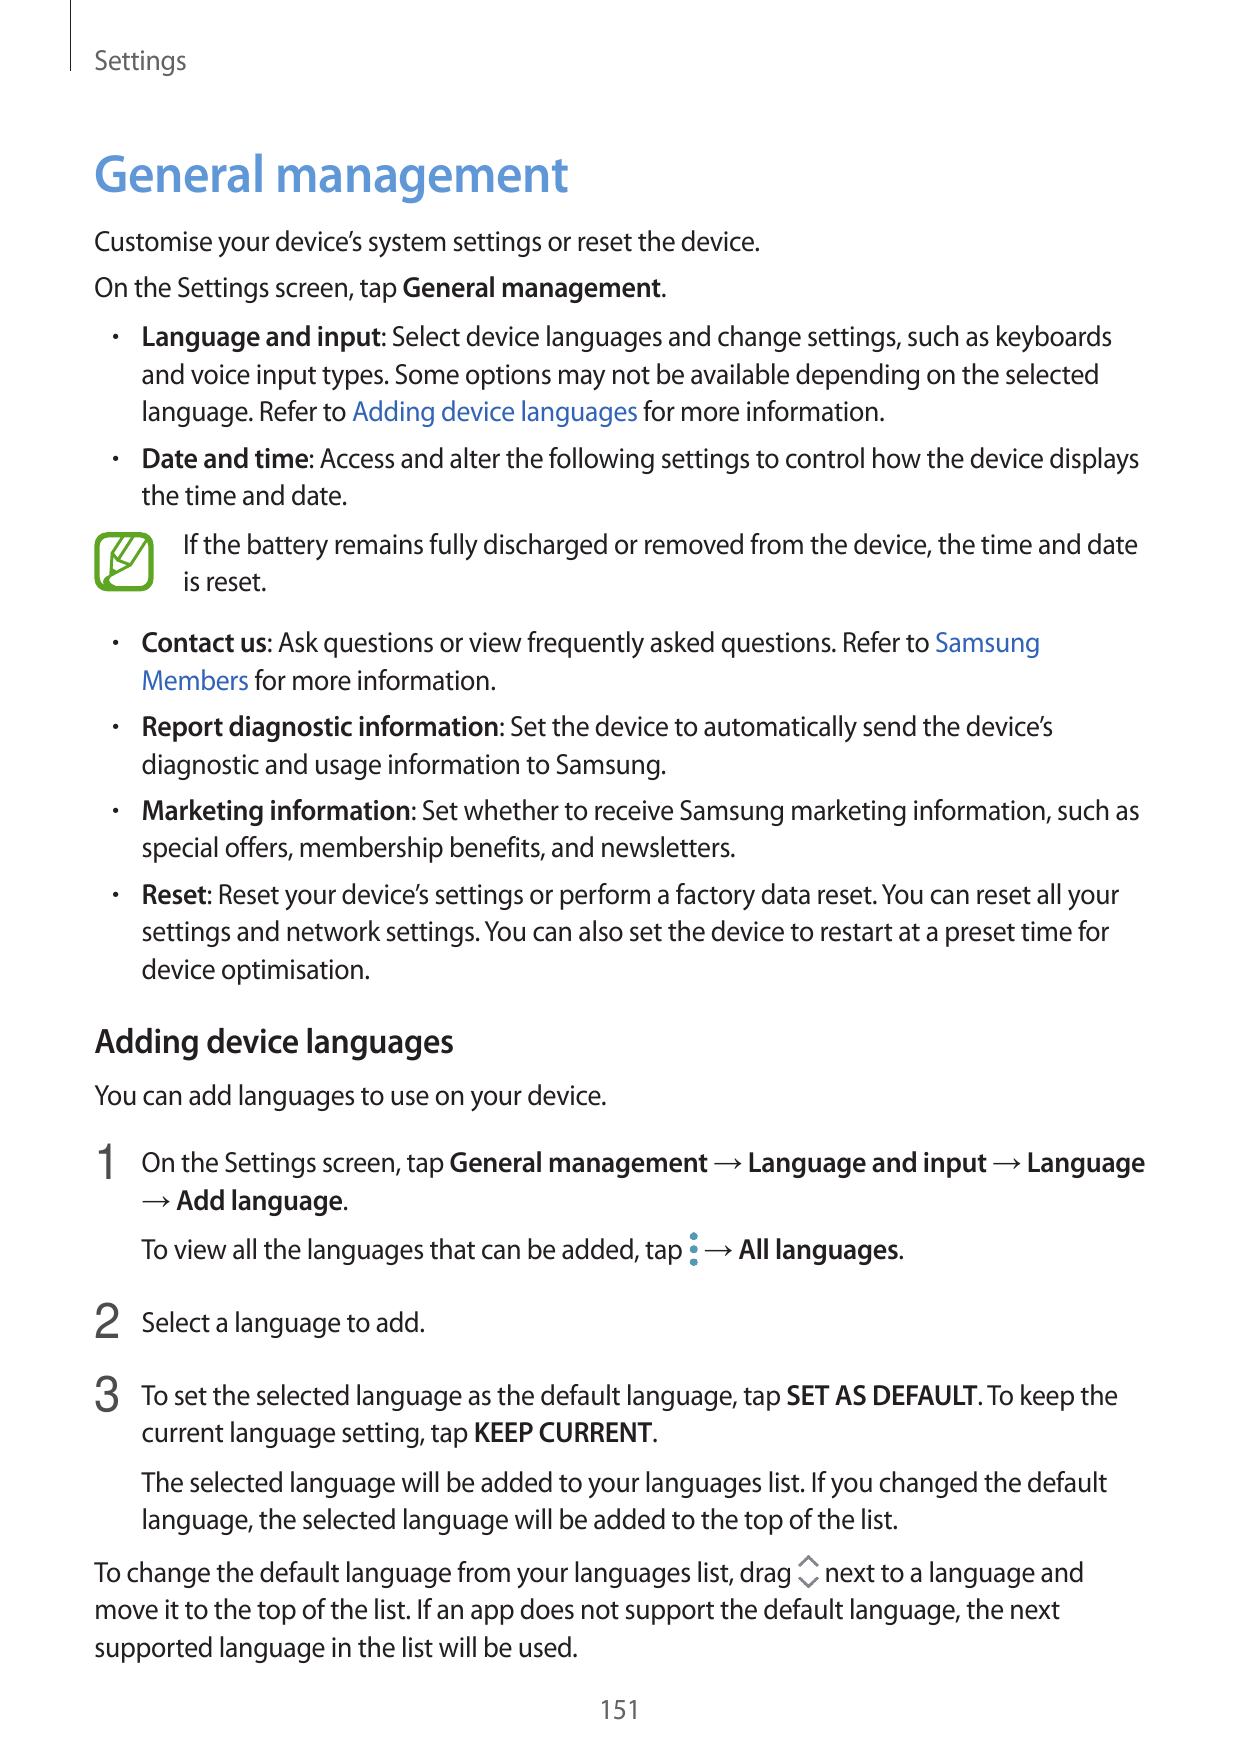 SettingsGeneral managementCustomise your device’s system settings or reset the device.On the Settings screen, tap General manage